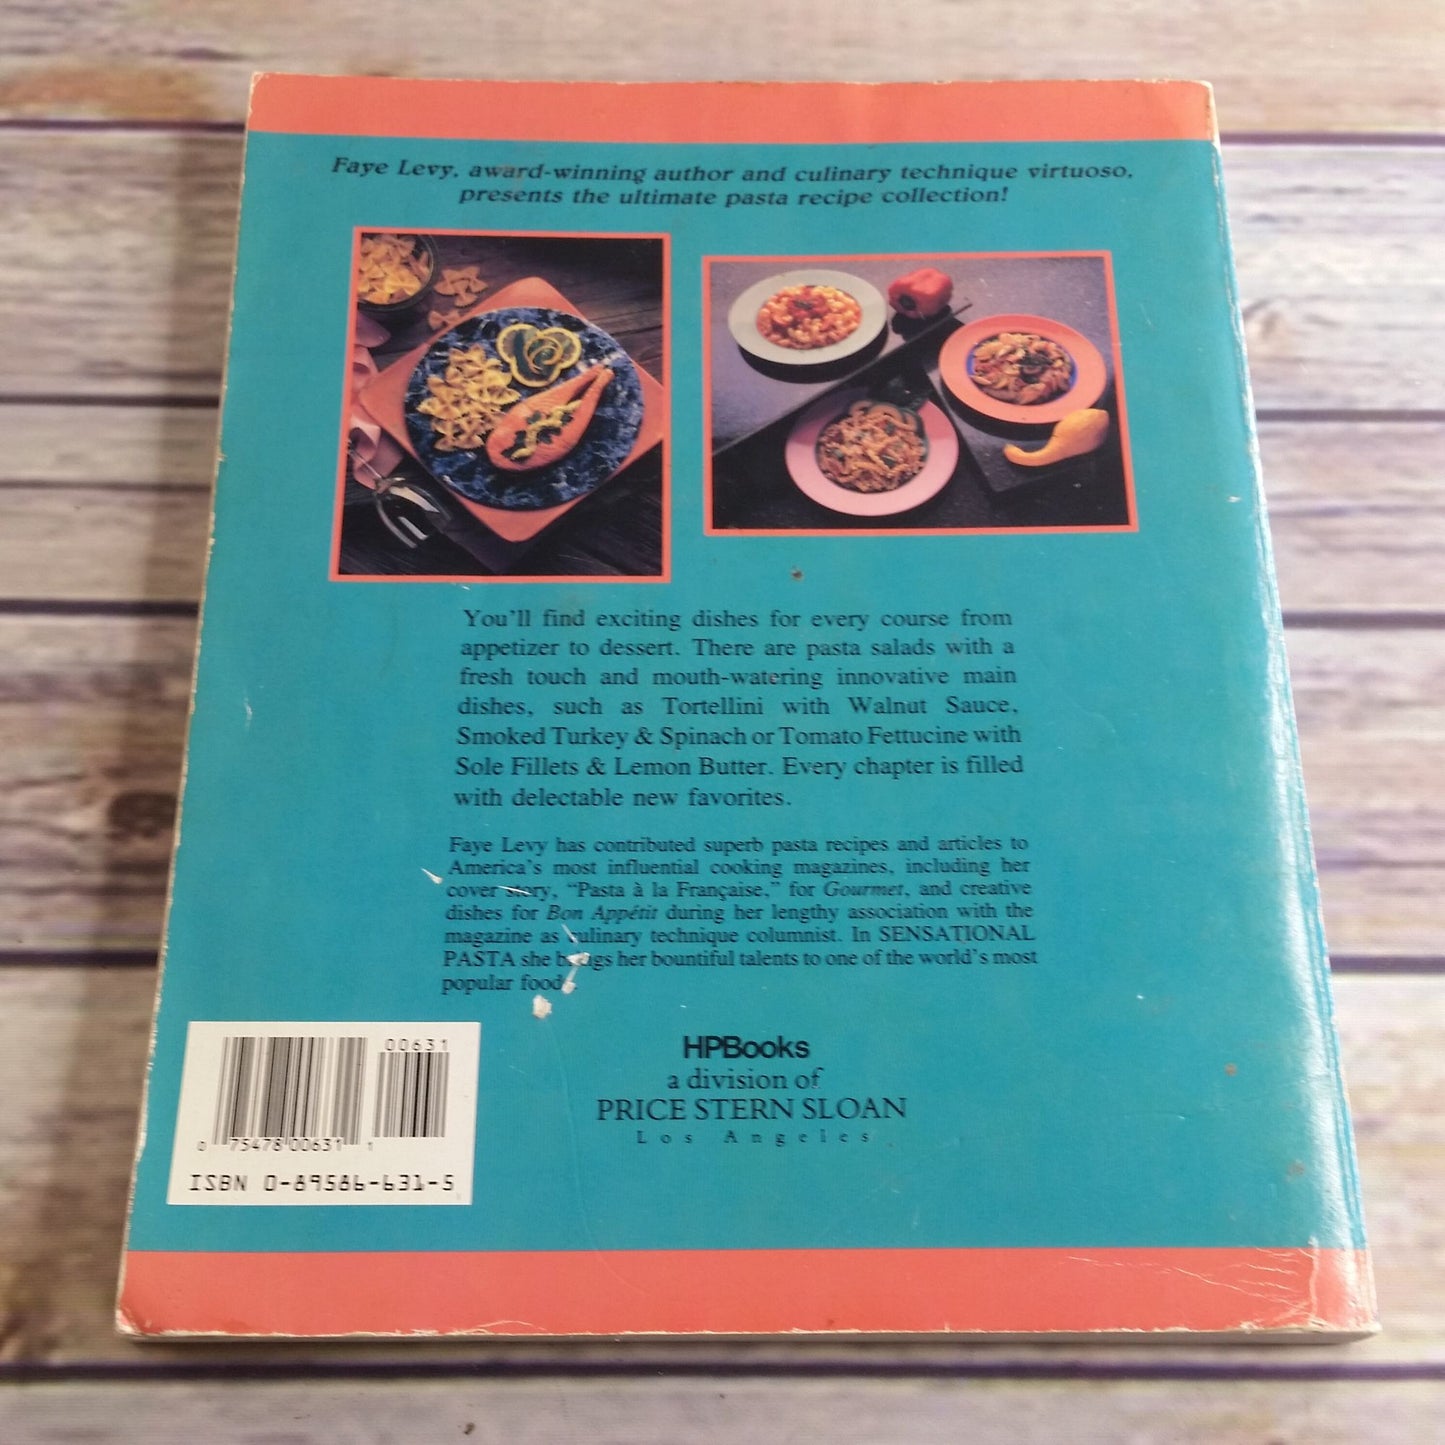 Vintage Cookbook Sensational Pasta Recipes 1989 Faye Levy Paperback HP Books 1980s Pasta Basics and Much More